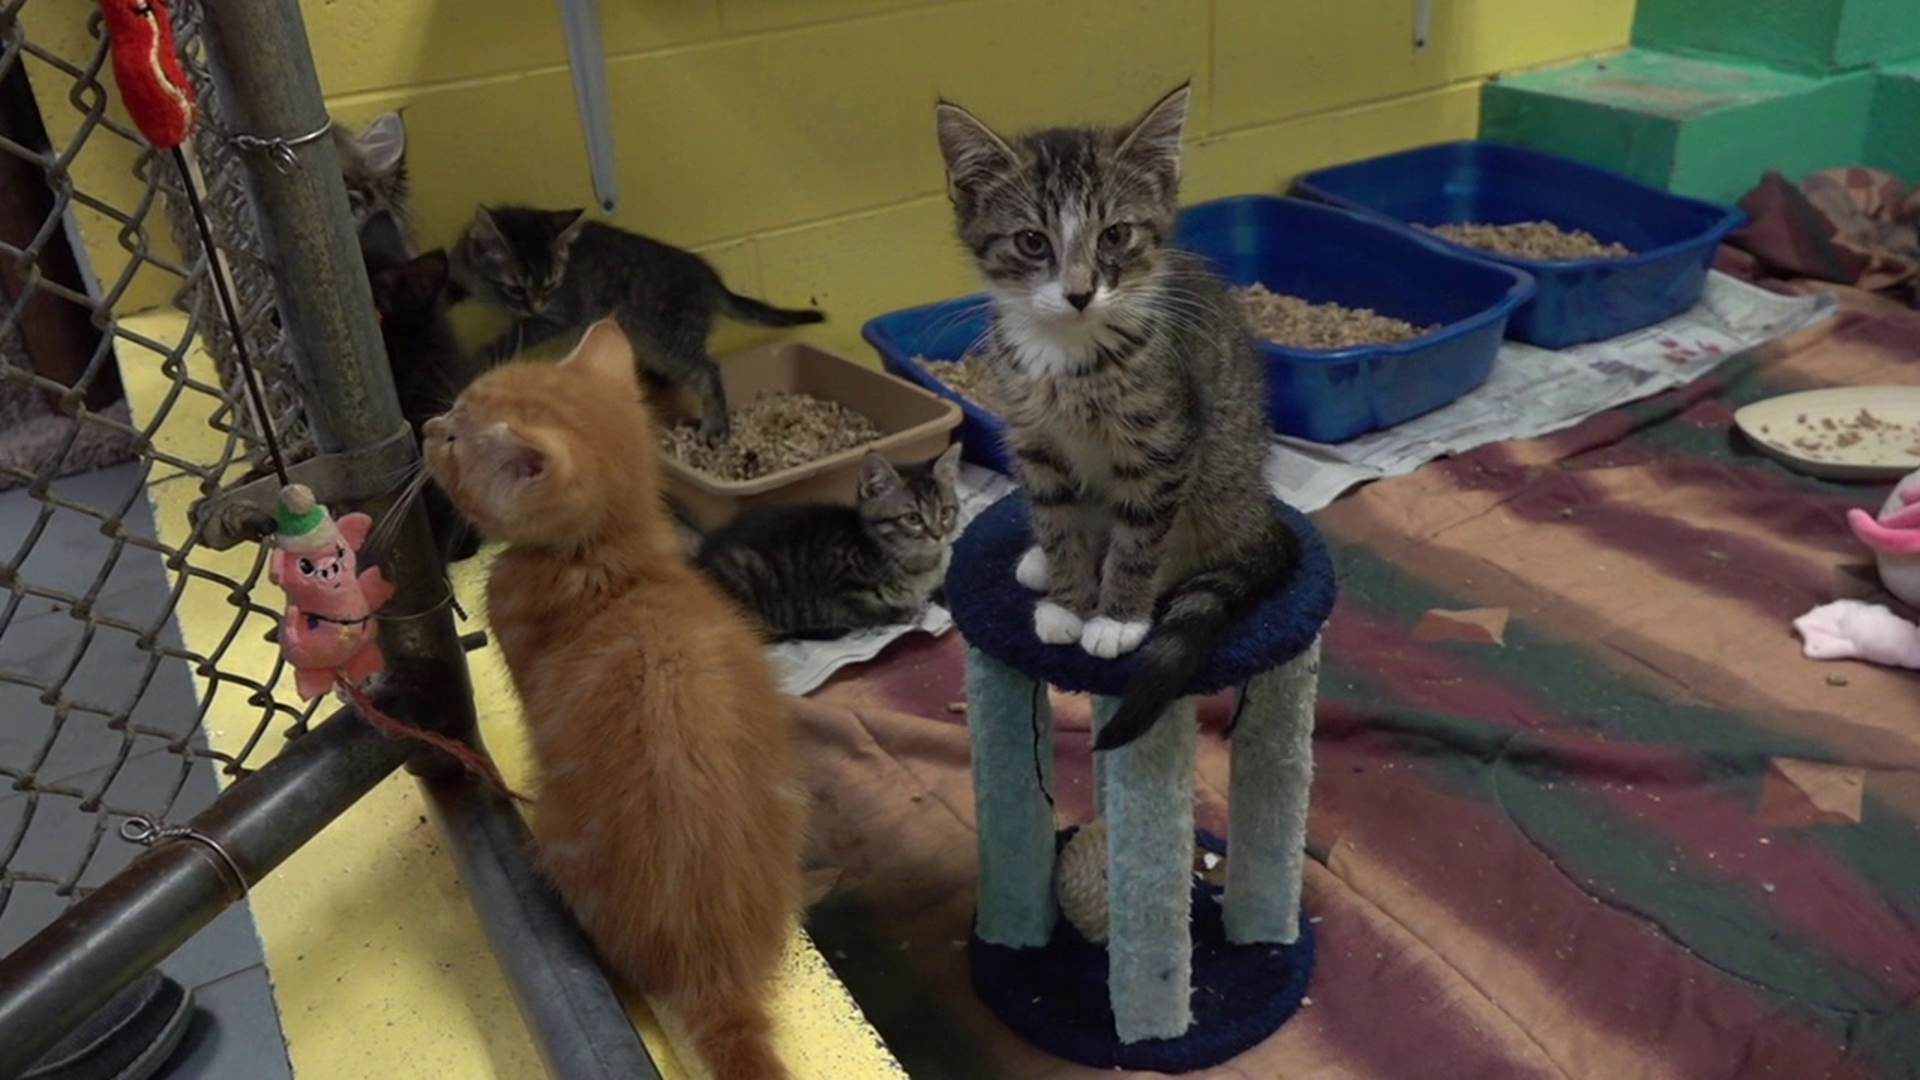 A group of organizations in Schuylkill County are hosting a fundraiser this weekend to help stray cats.